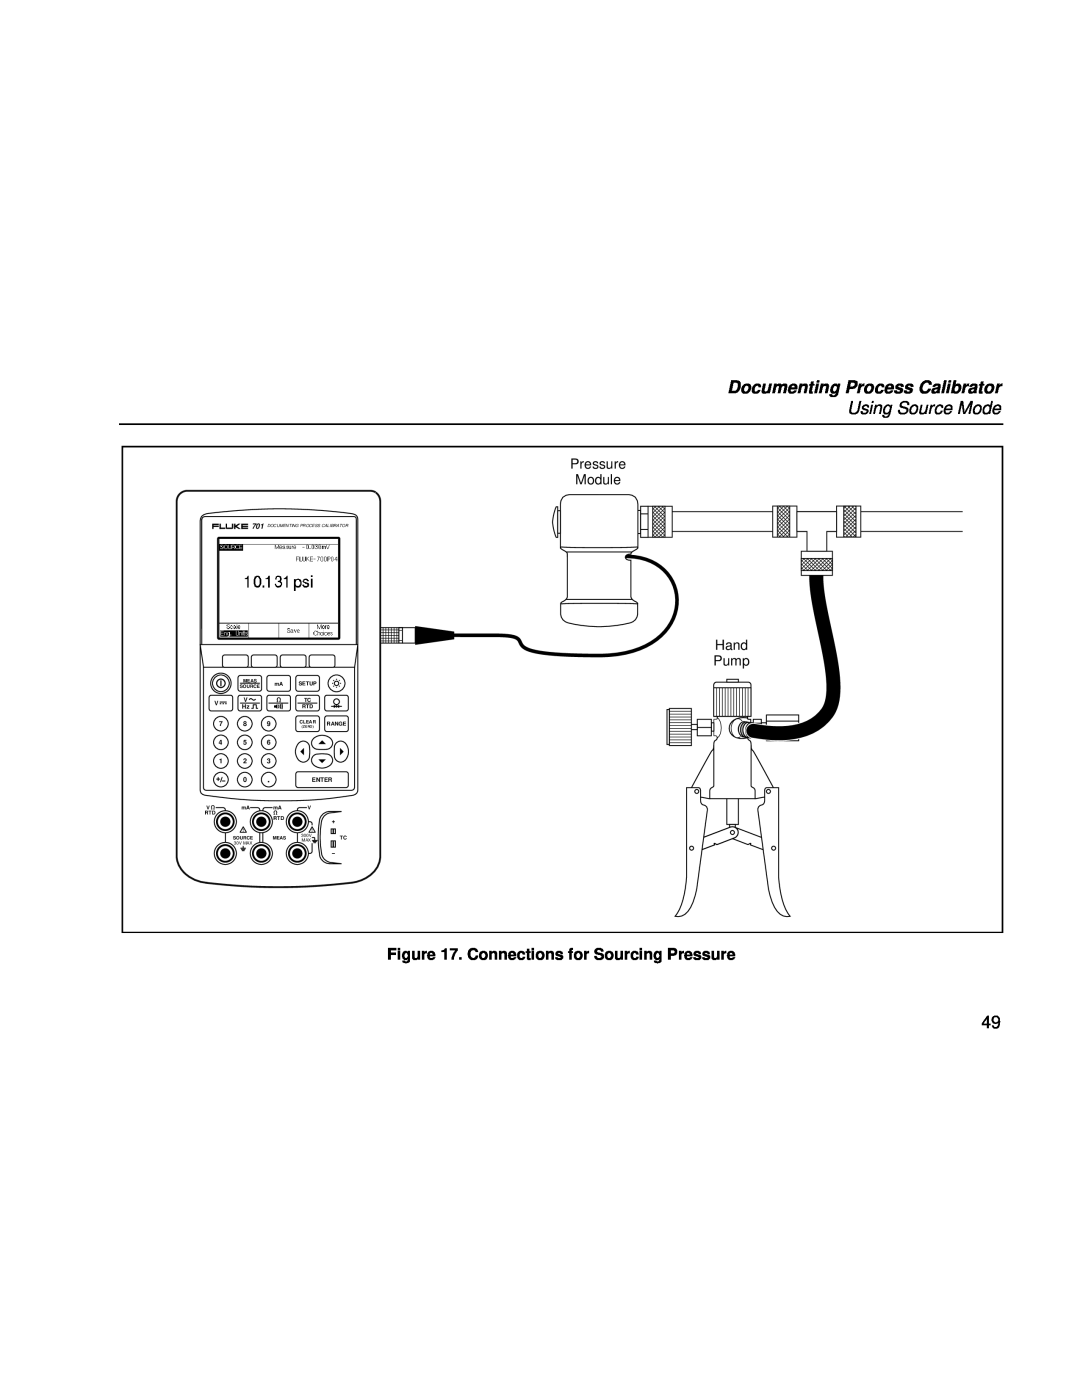 Fluke Rev. 4 Documenting Process Calibrator, Using Source Mode, Connections for Sourcing Pressure, Pressure Module, Enter 